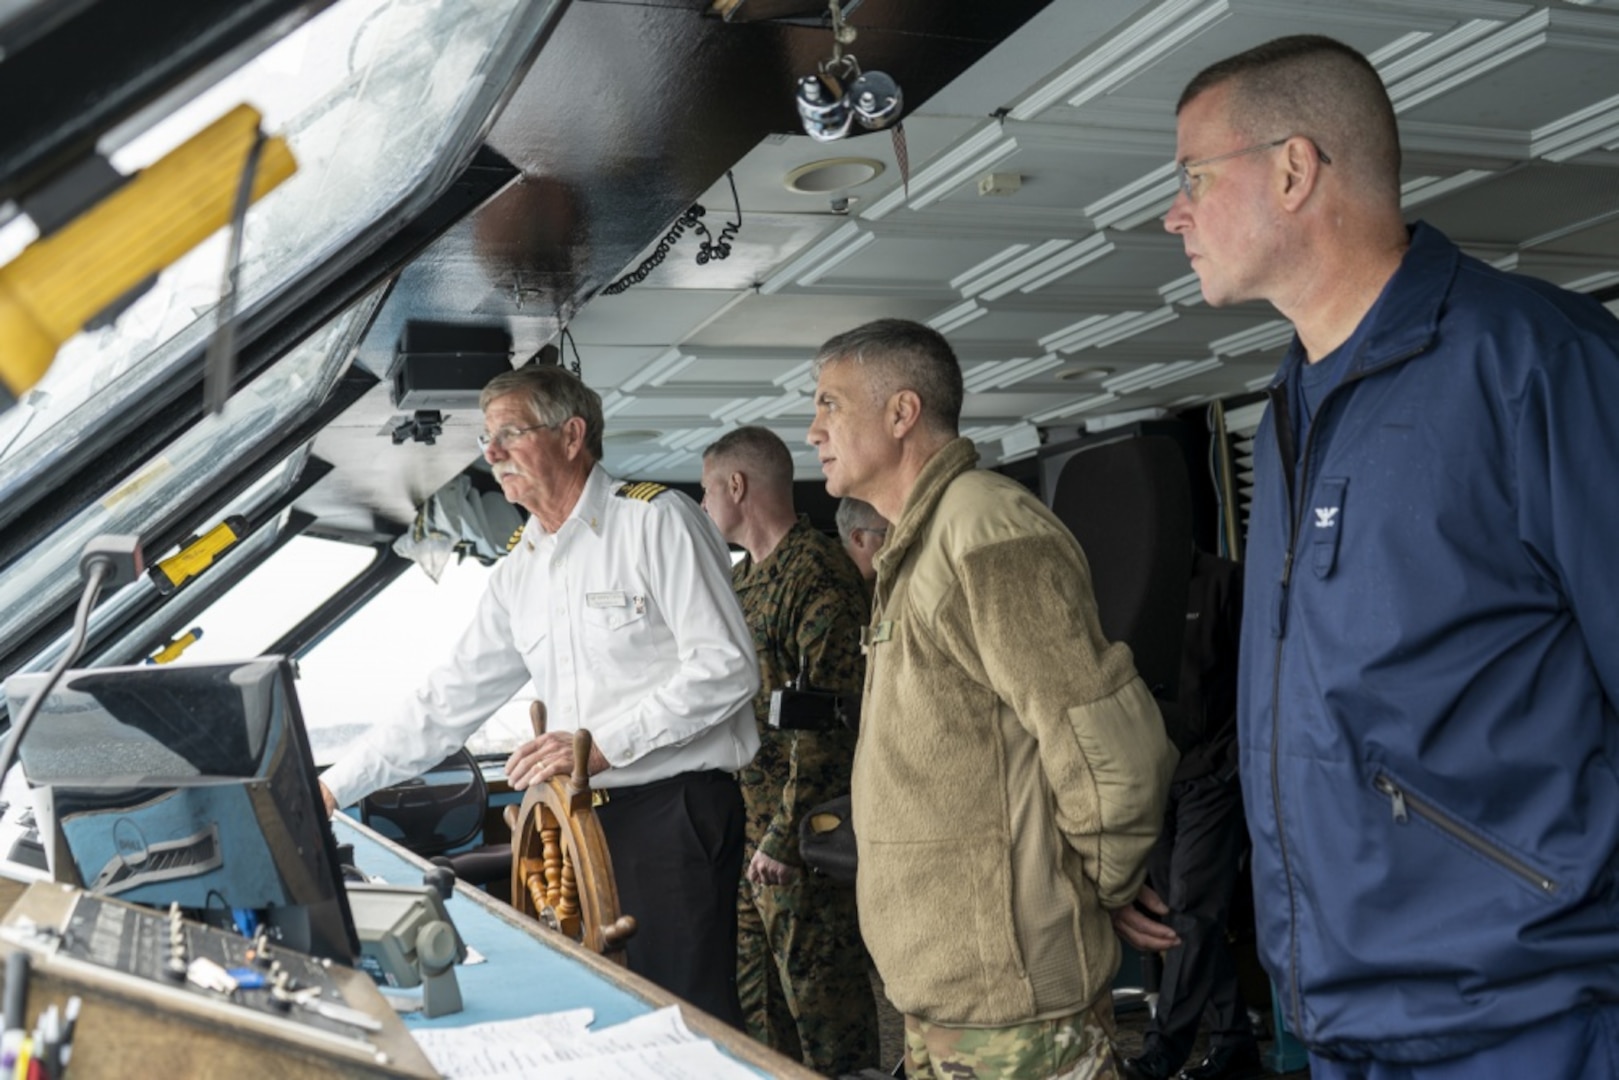 U.S. Army Gen. Paul Nakasone (middle) and Coast Guard Capt. Kevin Carroll (right) get a tour of the bridge aboard the Spirit of Norfolk while transiting to Coast Guard Base Portsmouth, Virginia, March 6, 2020. The two servicemembers were participating in the Cyber Component Commanders’ Conference, which served to raise awareness of the importance of maintaining strong cyber security postures within the Coast Guard. (U.S. Coast Guard photo by Seaman Katlin Kilroy)